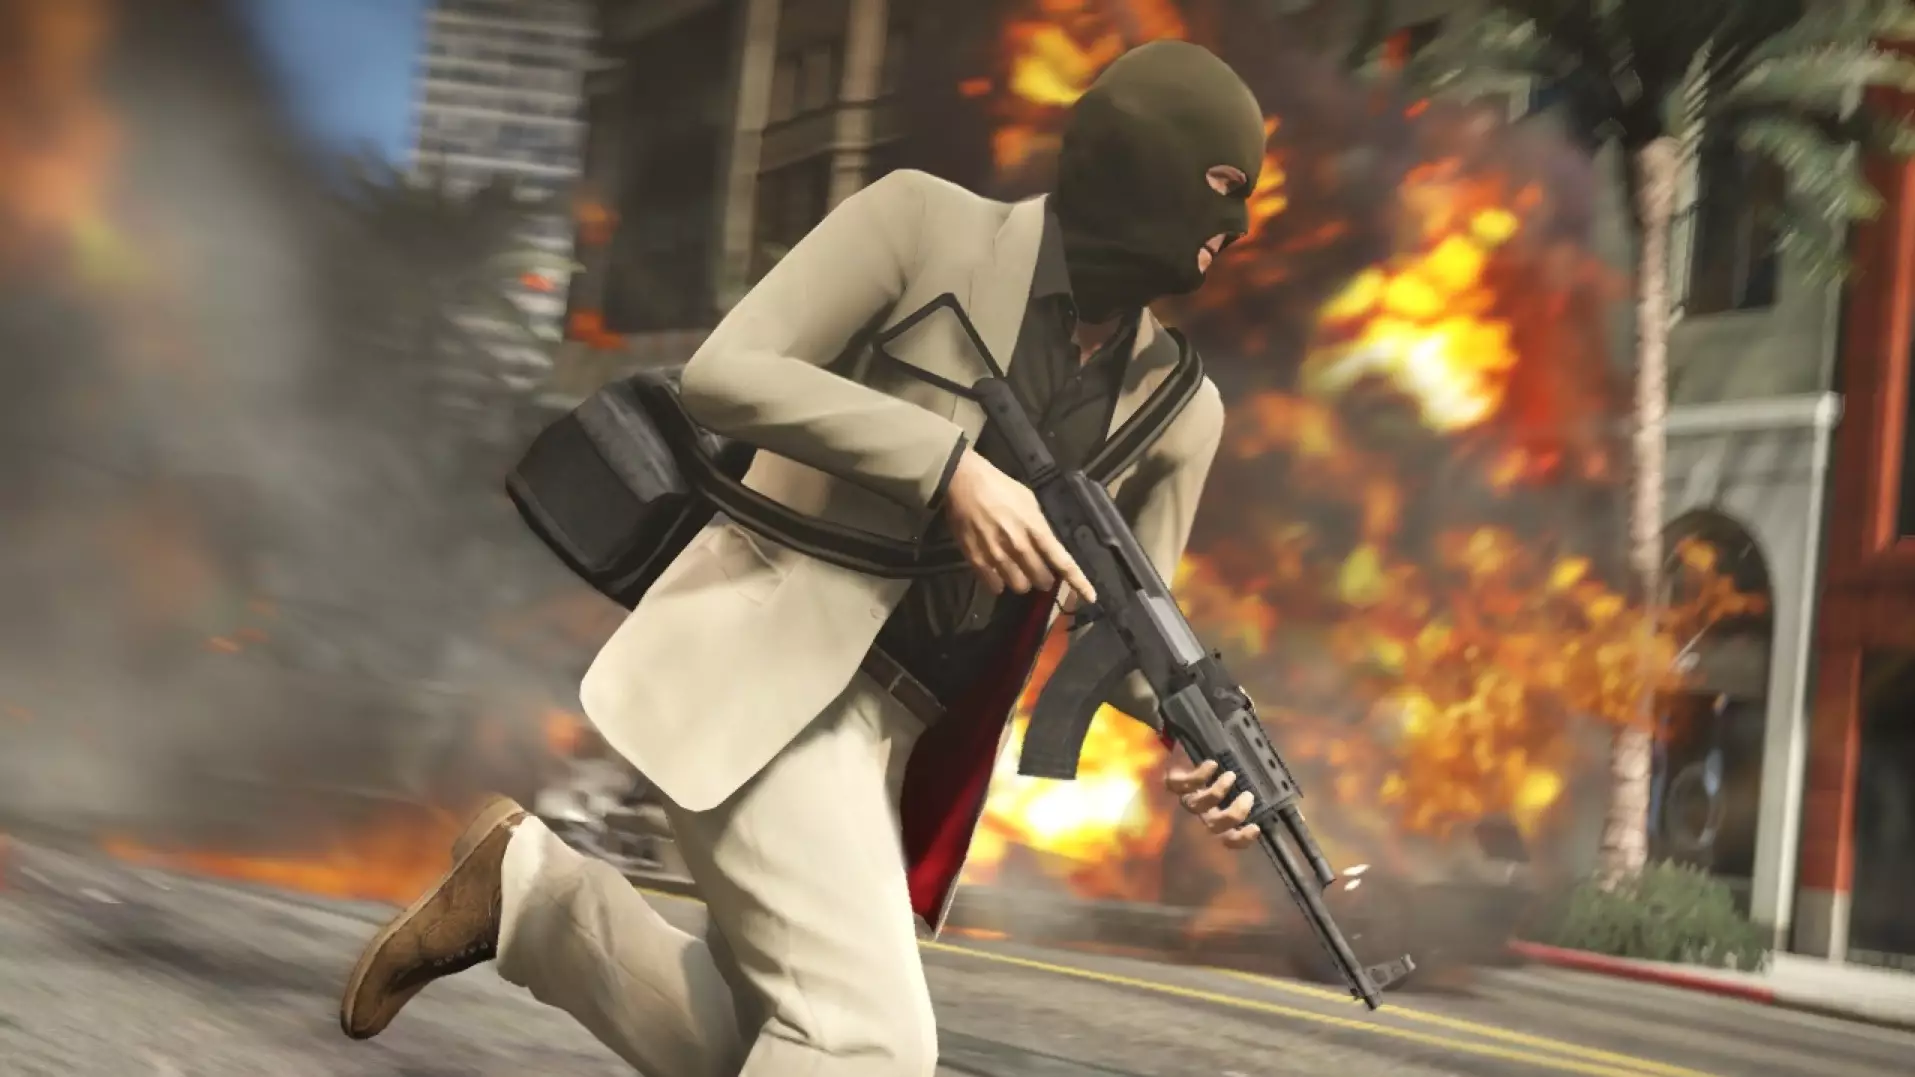 CEO Of Company Behind Grand Theft Auto Slams Trump's Claim Video Games Cause Violence